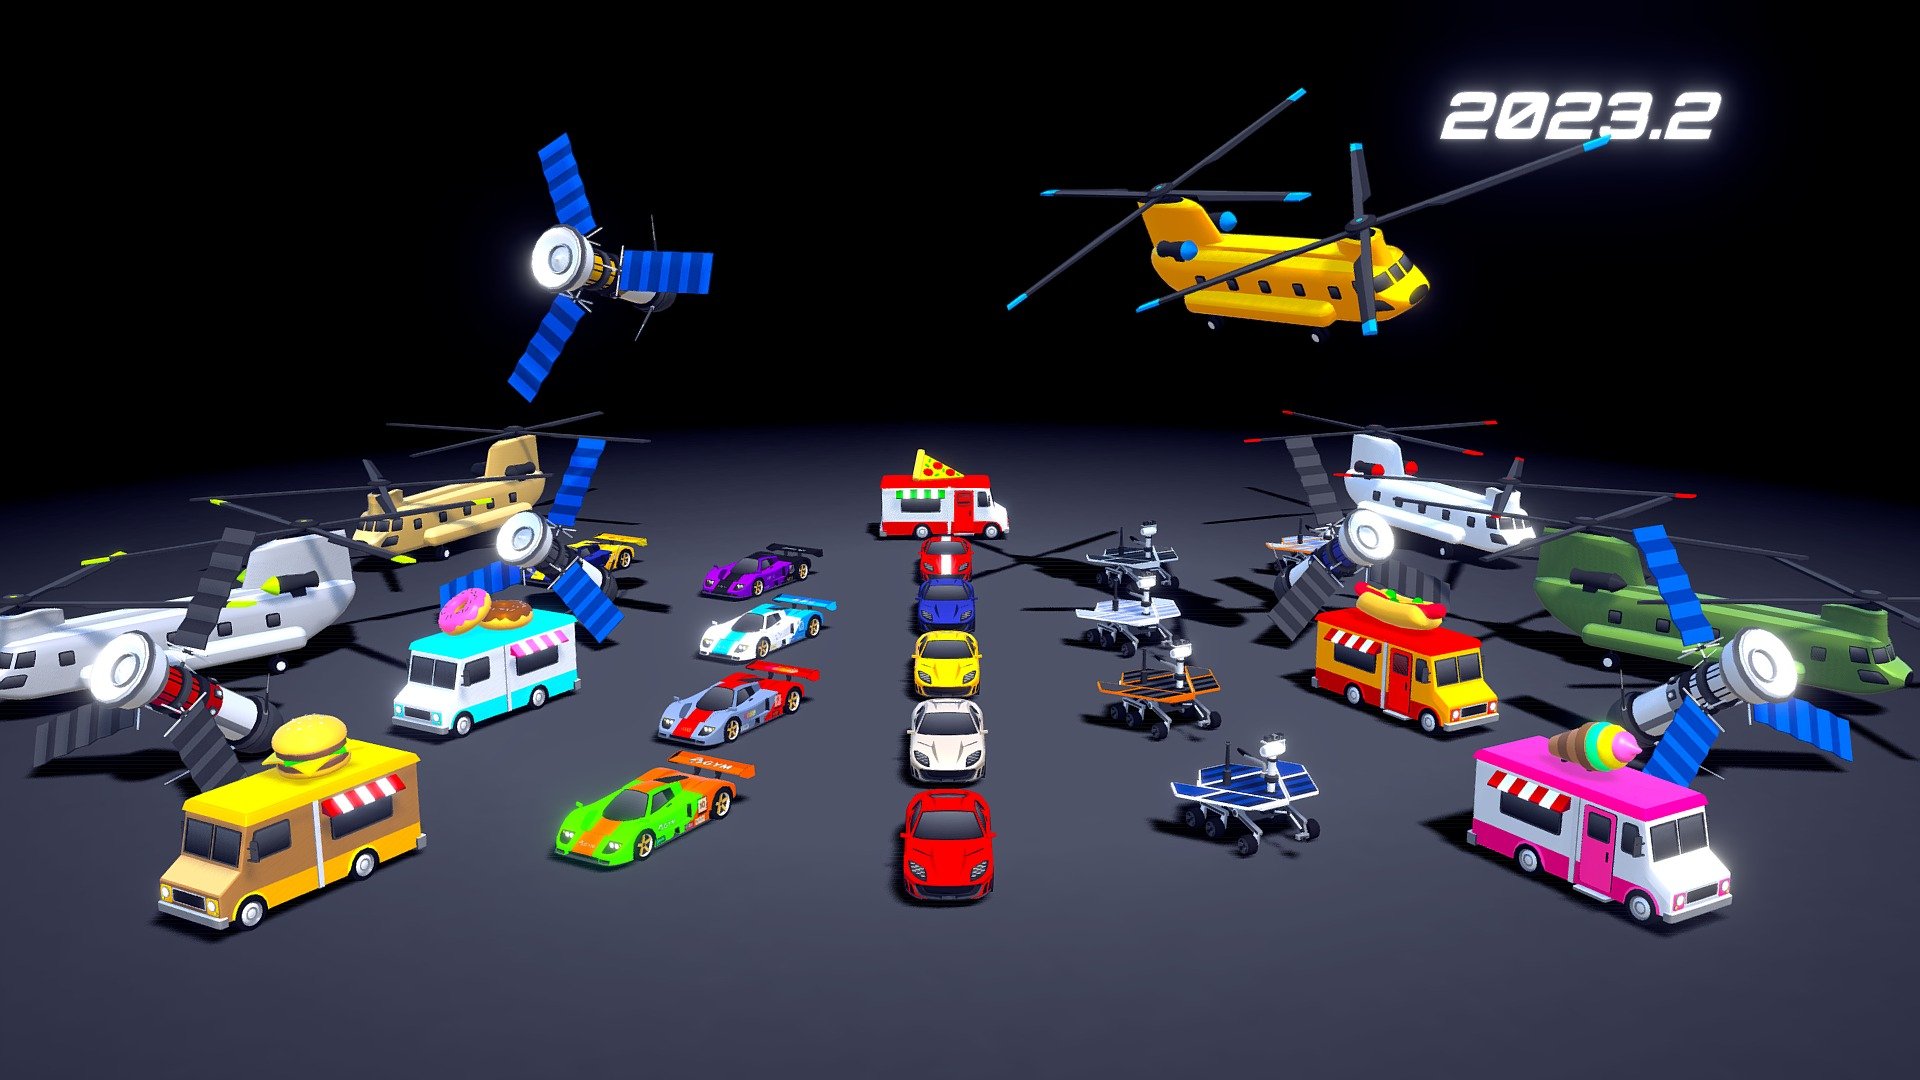 All these vehicles will be added to ARCADE: Ultimate Vehicles Pack in February 3rd with no additional cost. Available in Unity3D (in the Unity Asset Store) and Sketchfab.

This update includes cars, space vehicles and more!. I hope you like it

Also, I finished updating all the racing cars of the A class. In the following updates I will be working on the B class.

Best regards, Mena 3d model